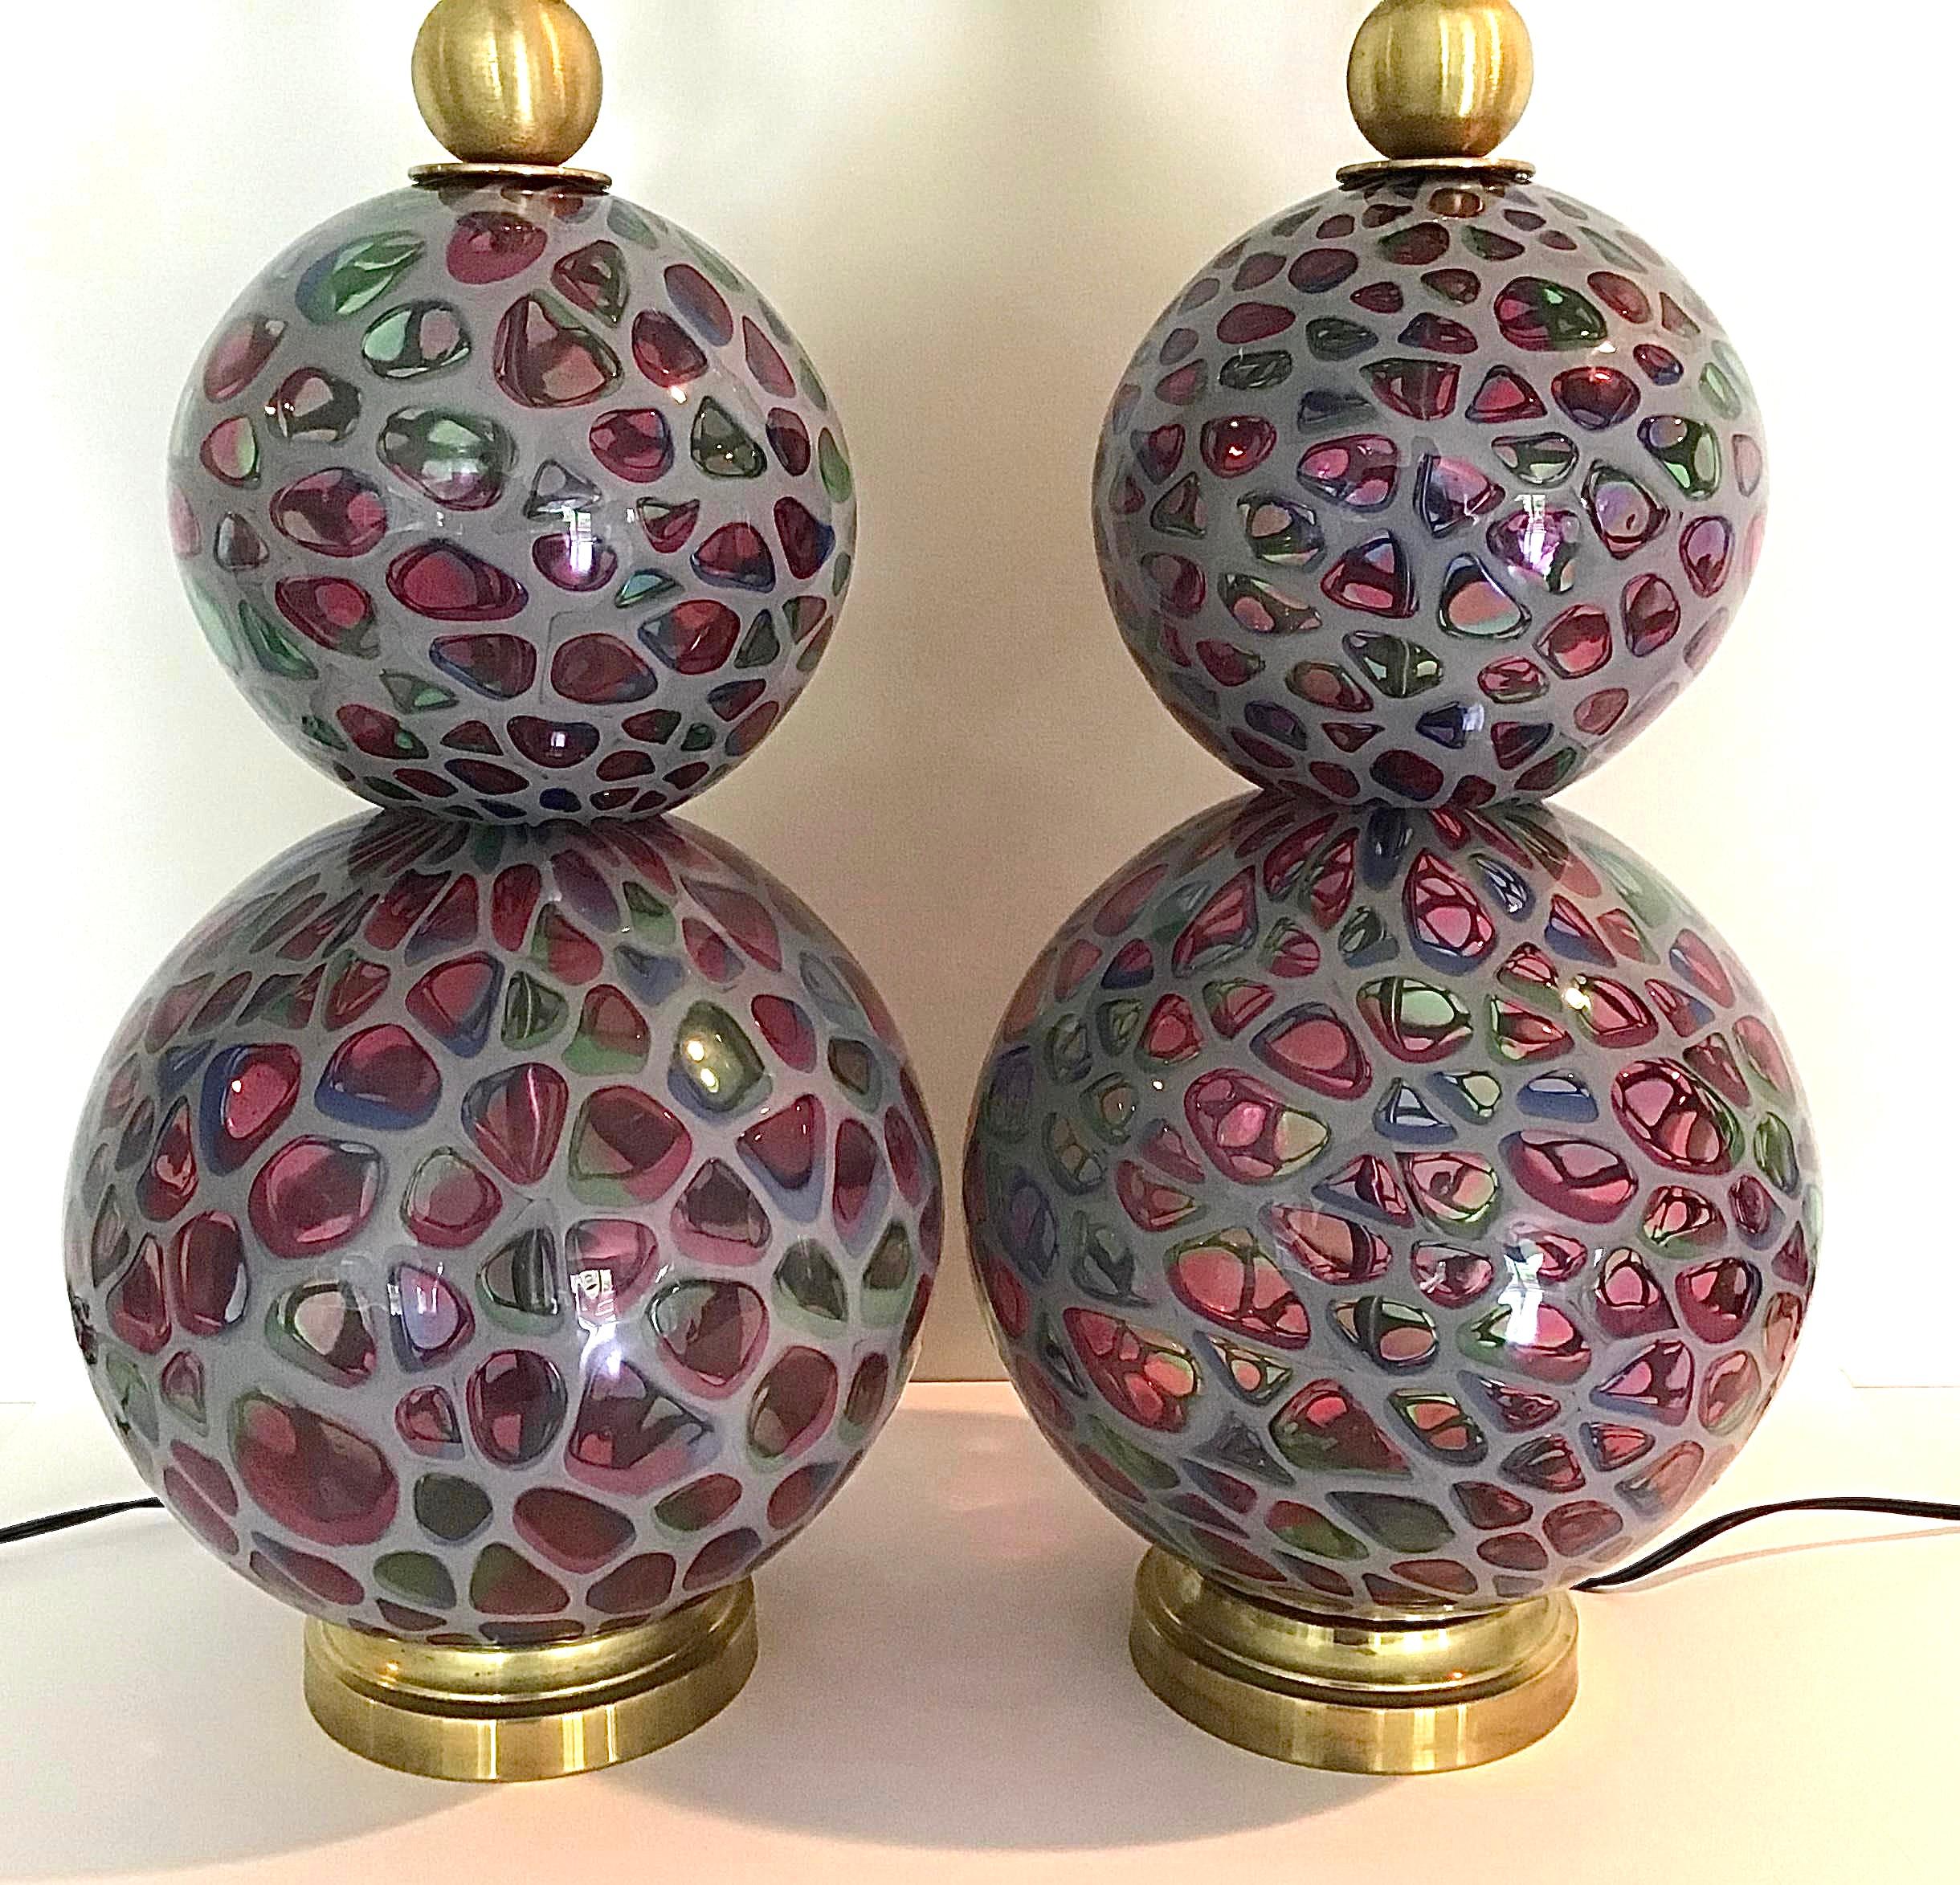 Rare pair of Tiffany Nerox Murrine lamps by Fratelli Toso circa 1950’s. Glass alone height is 16 inches. 

Fratelli Toso’s most relevant contribution to Murano’s glassmaking history is their beautiful murrine (or millefiori). As ancient as this